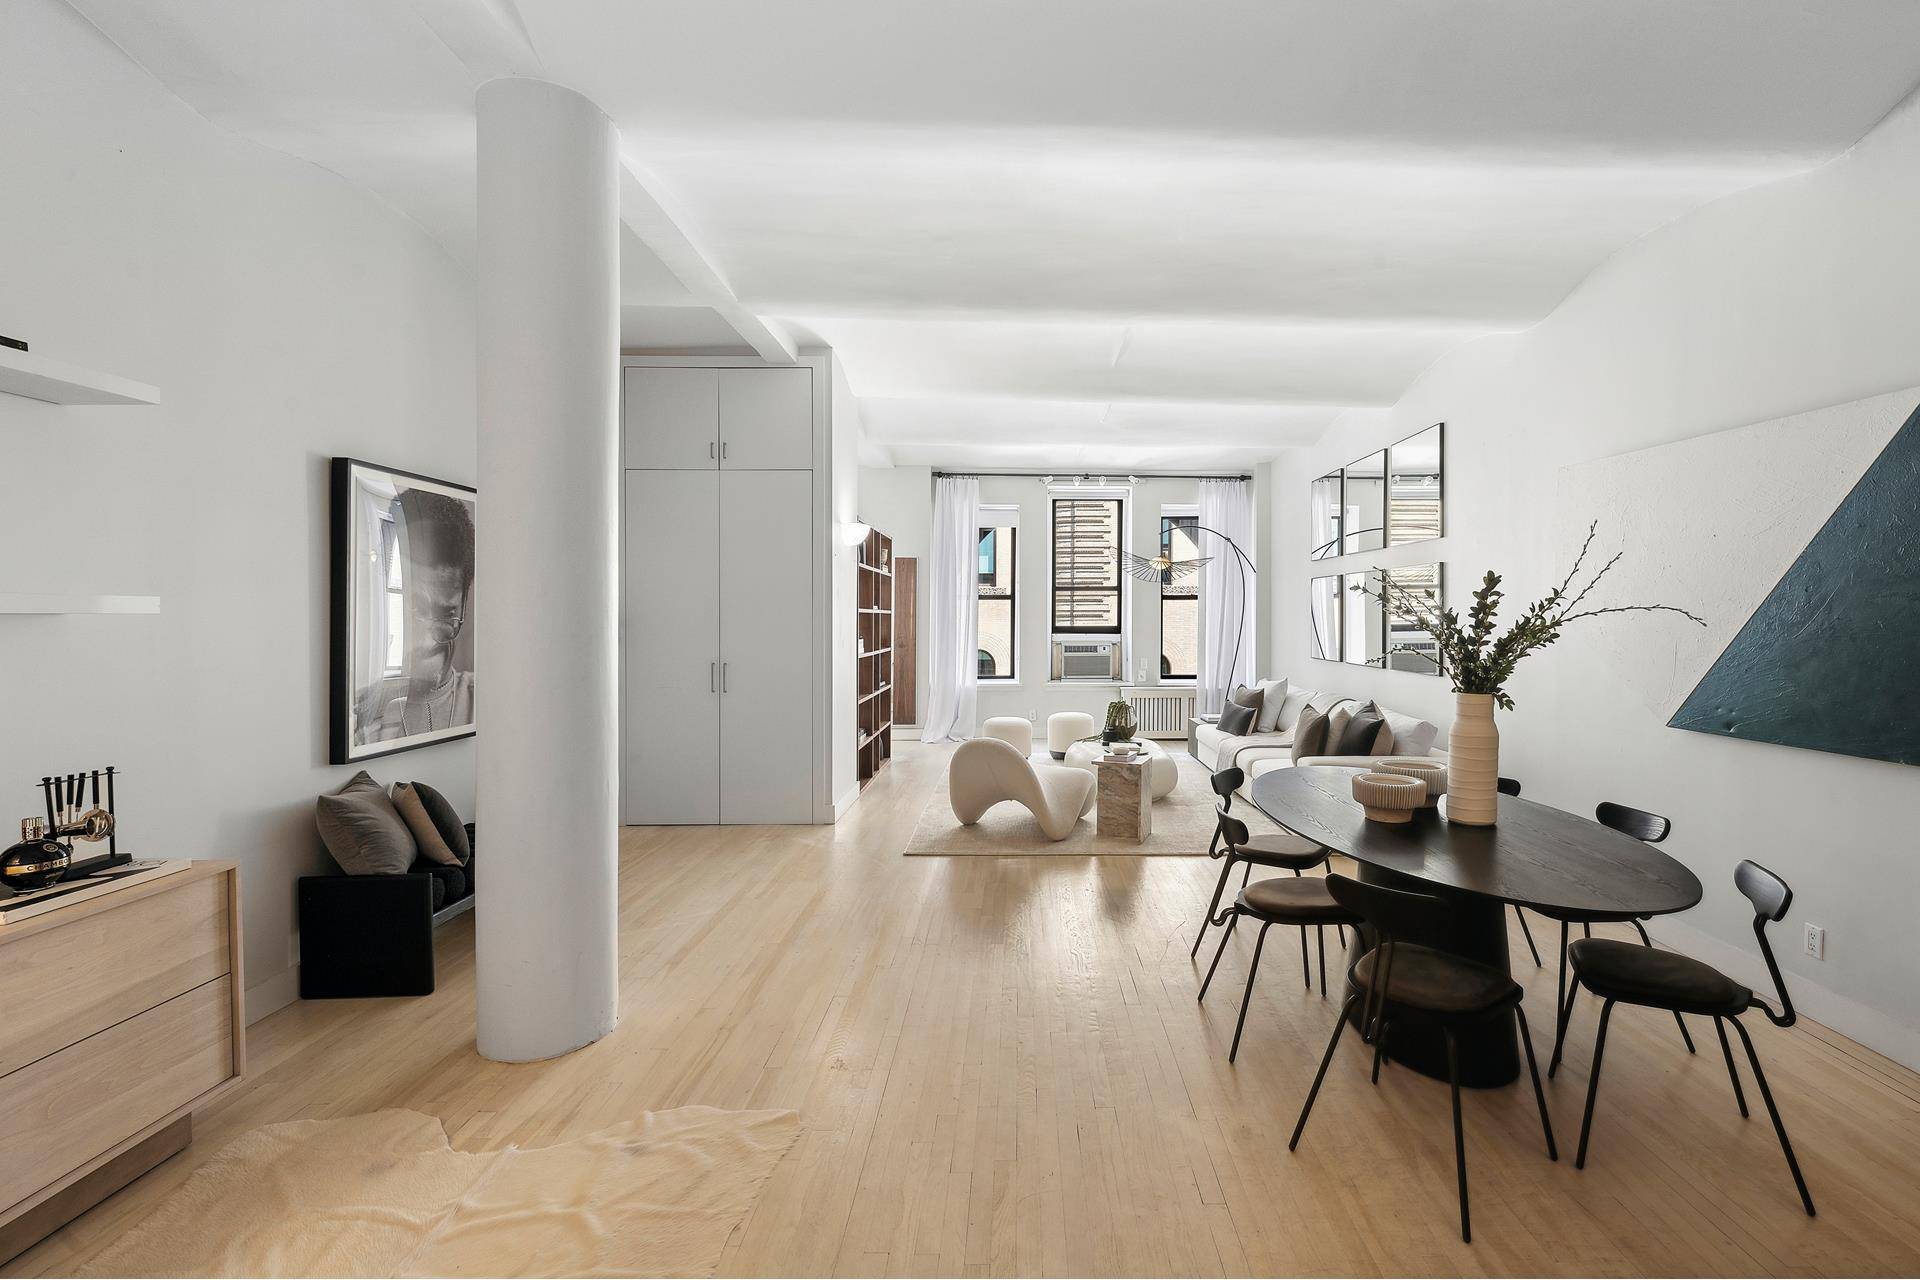 Welcome home to your stylish loft in the heart of the city, where architectural elegance meets comfort and convenience.